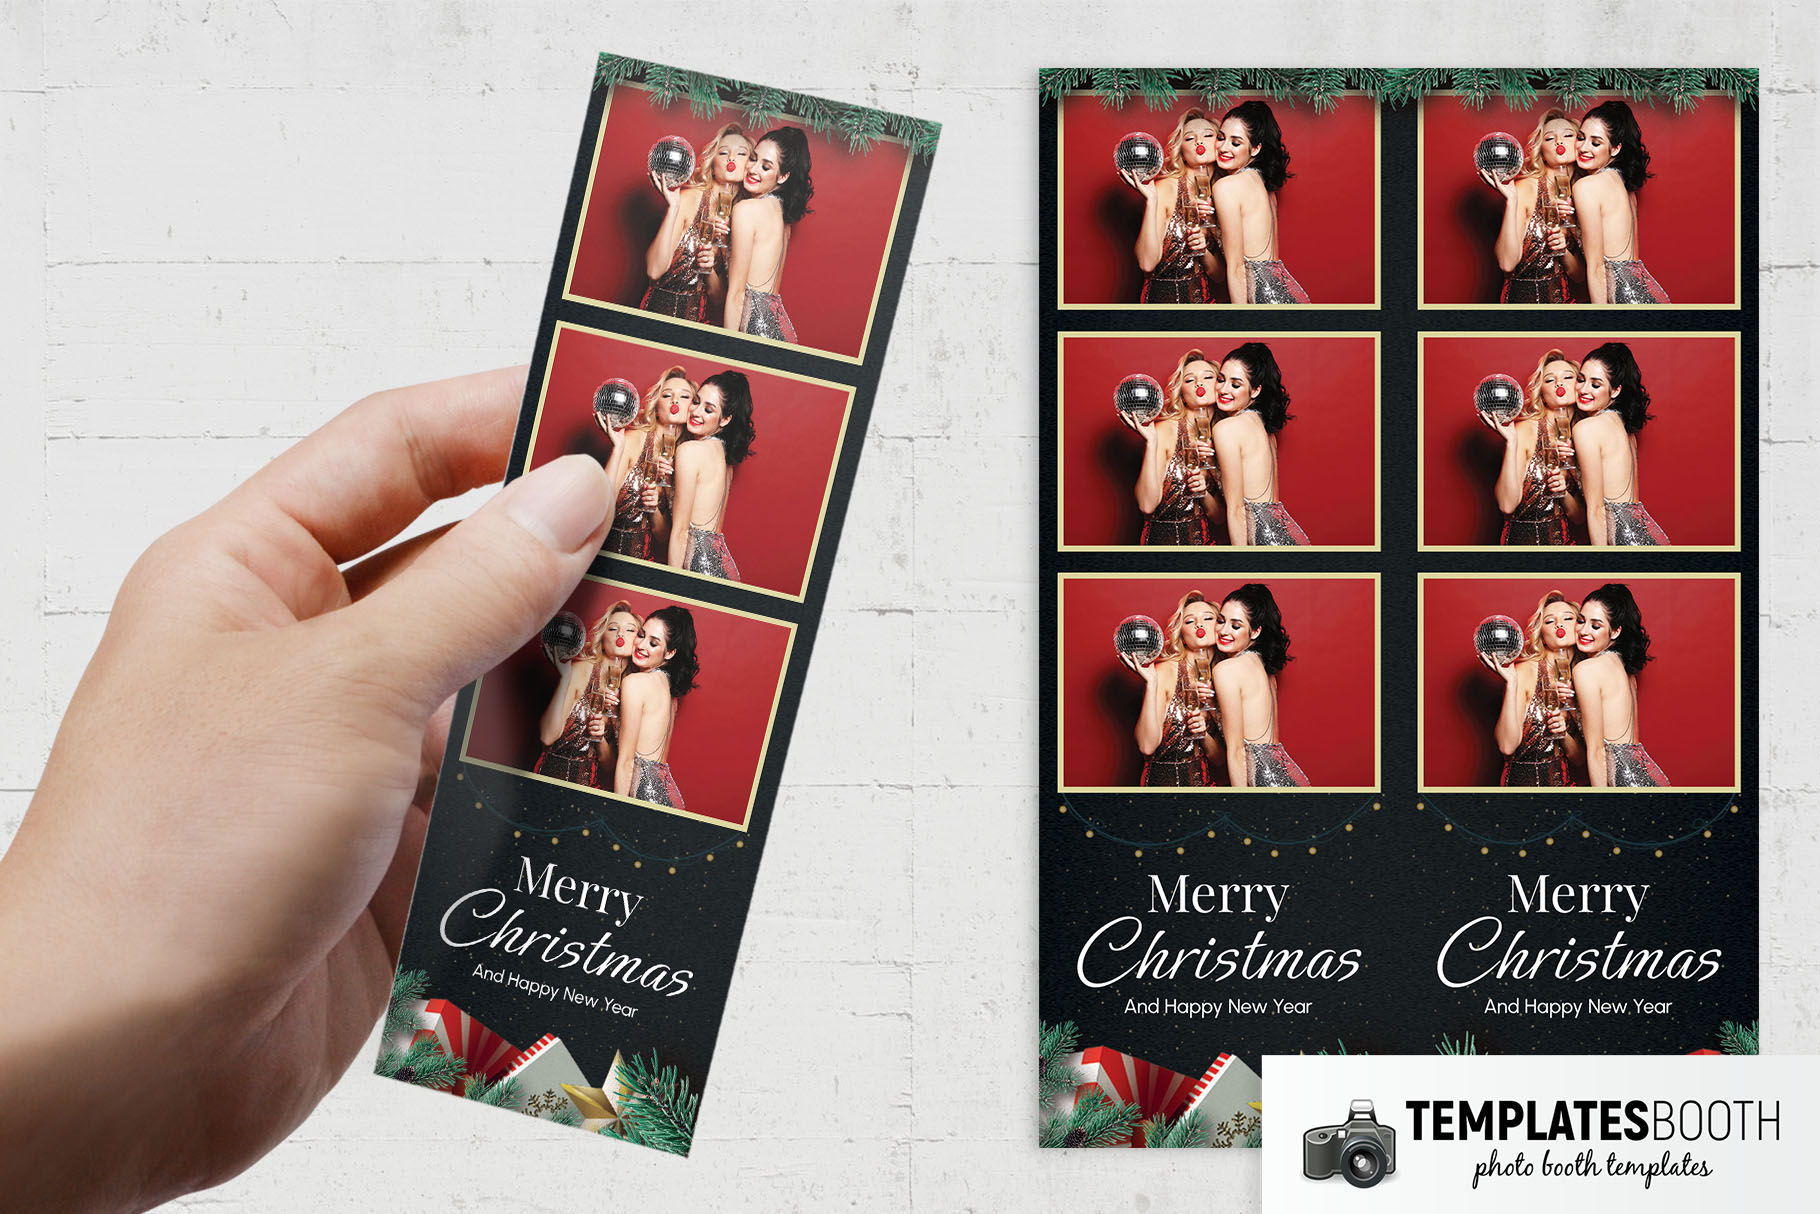 Free Festive Christmas Photo Booth Template